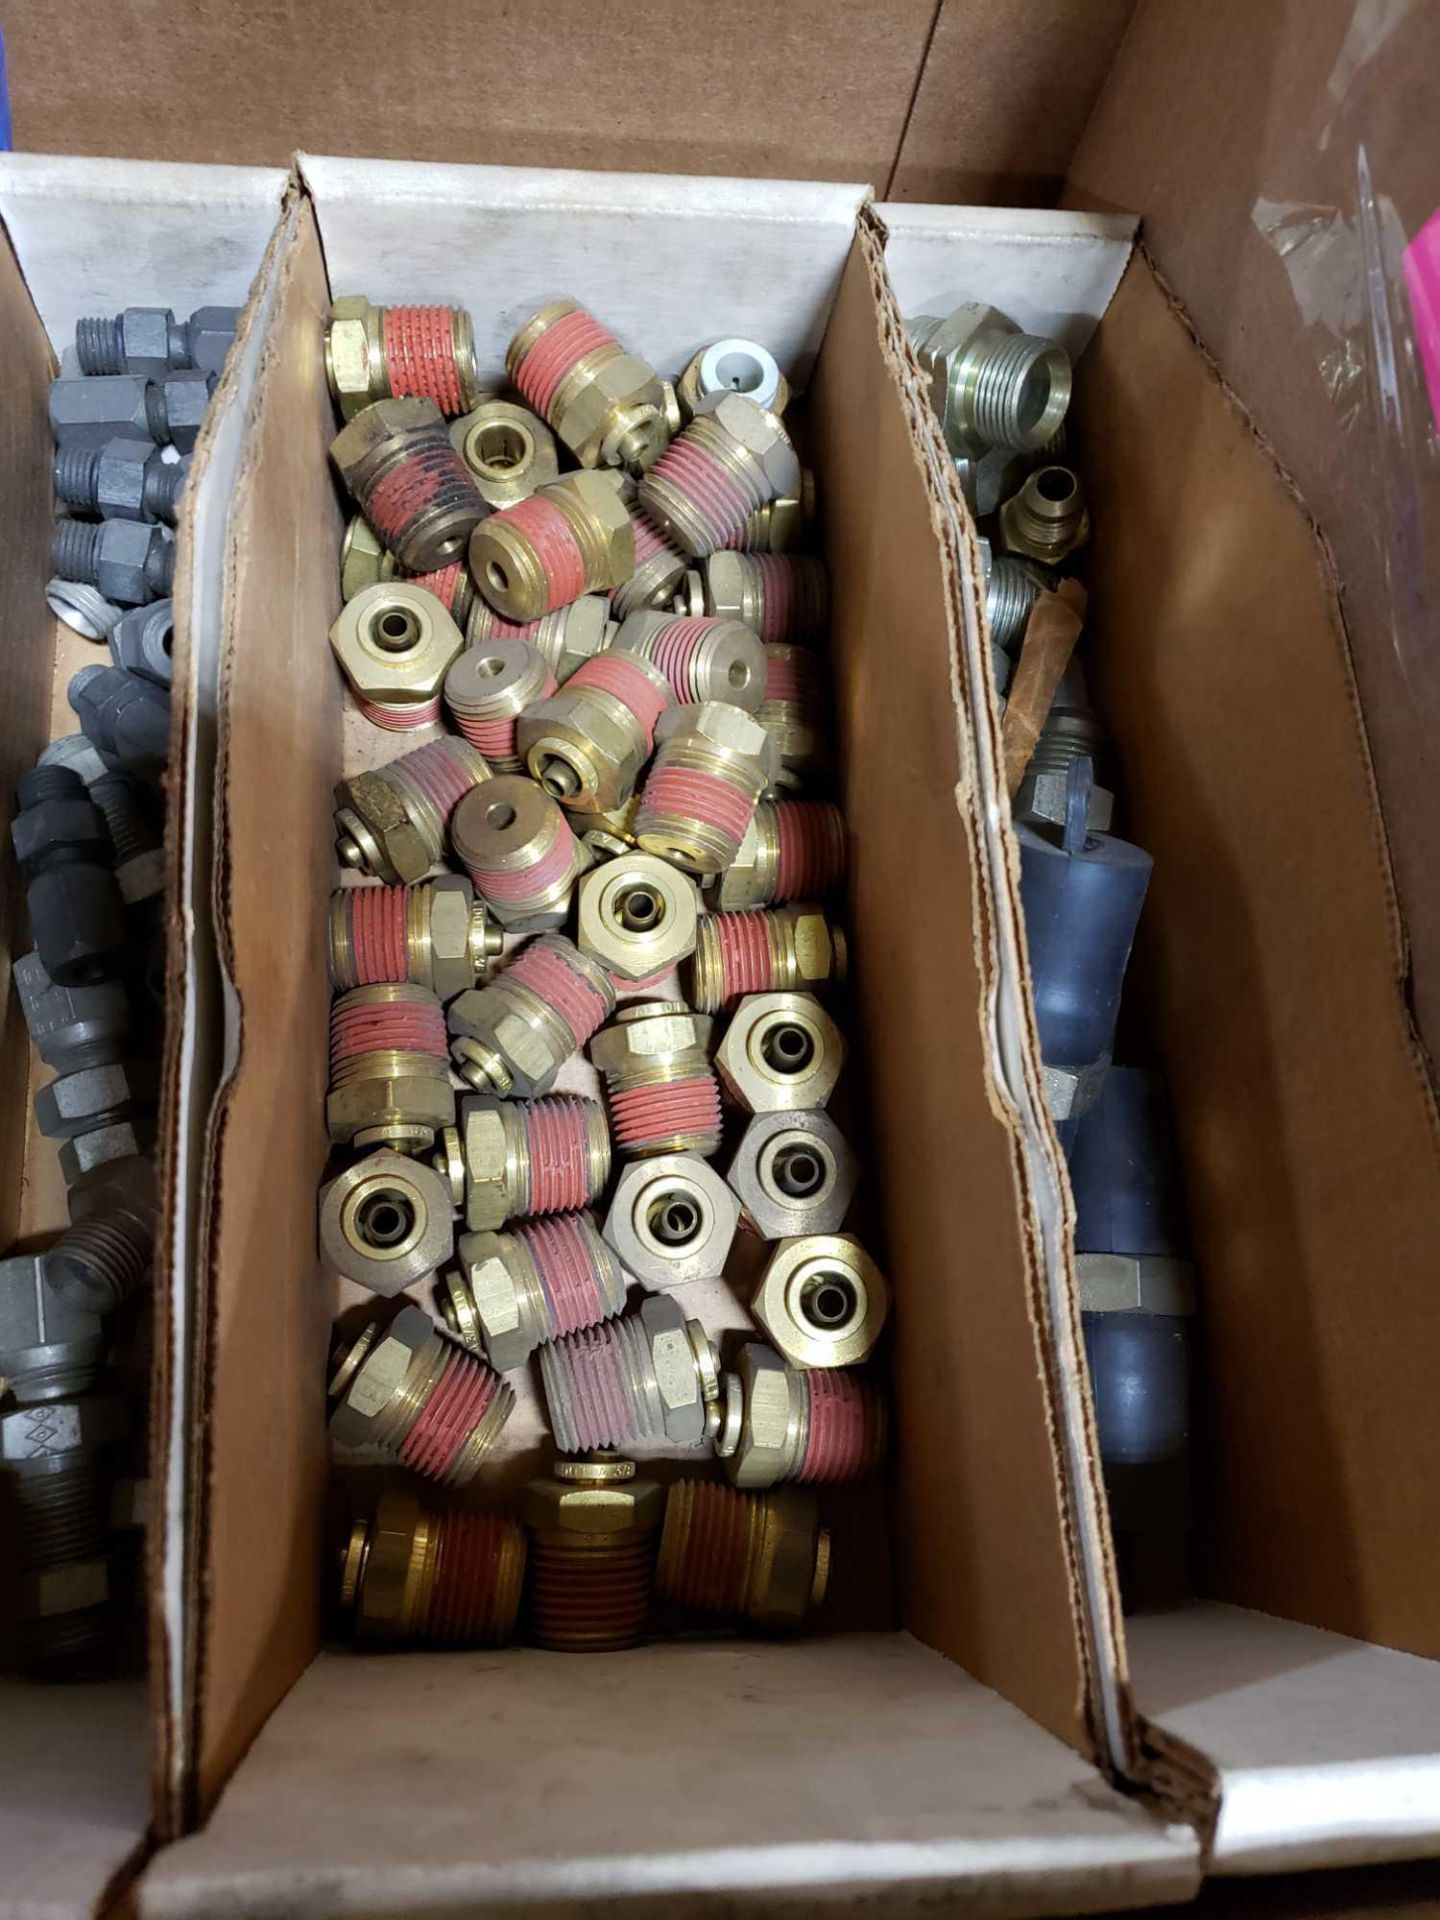 Lot of assorted hydraulic and pneumatic fittings. Some brass. New as pictured. - Image 3 of 3